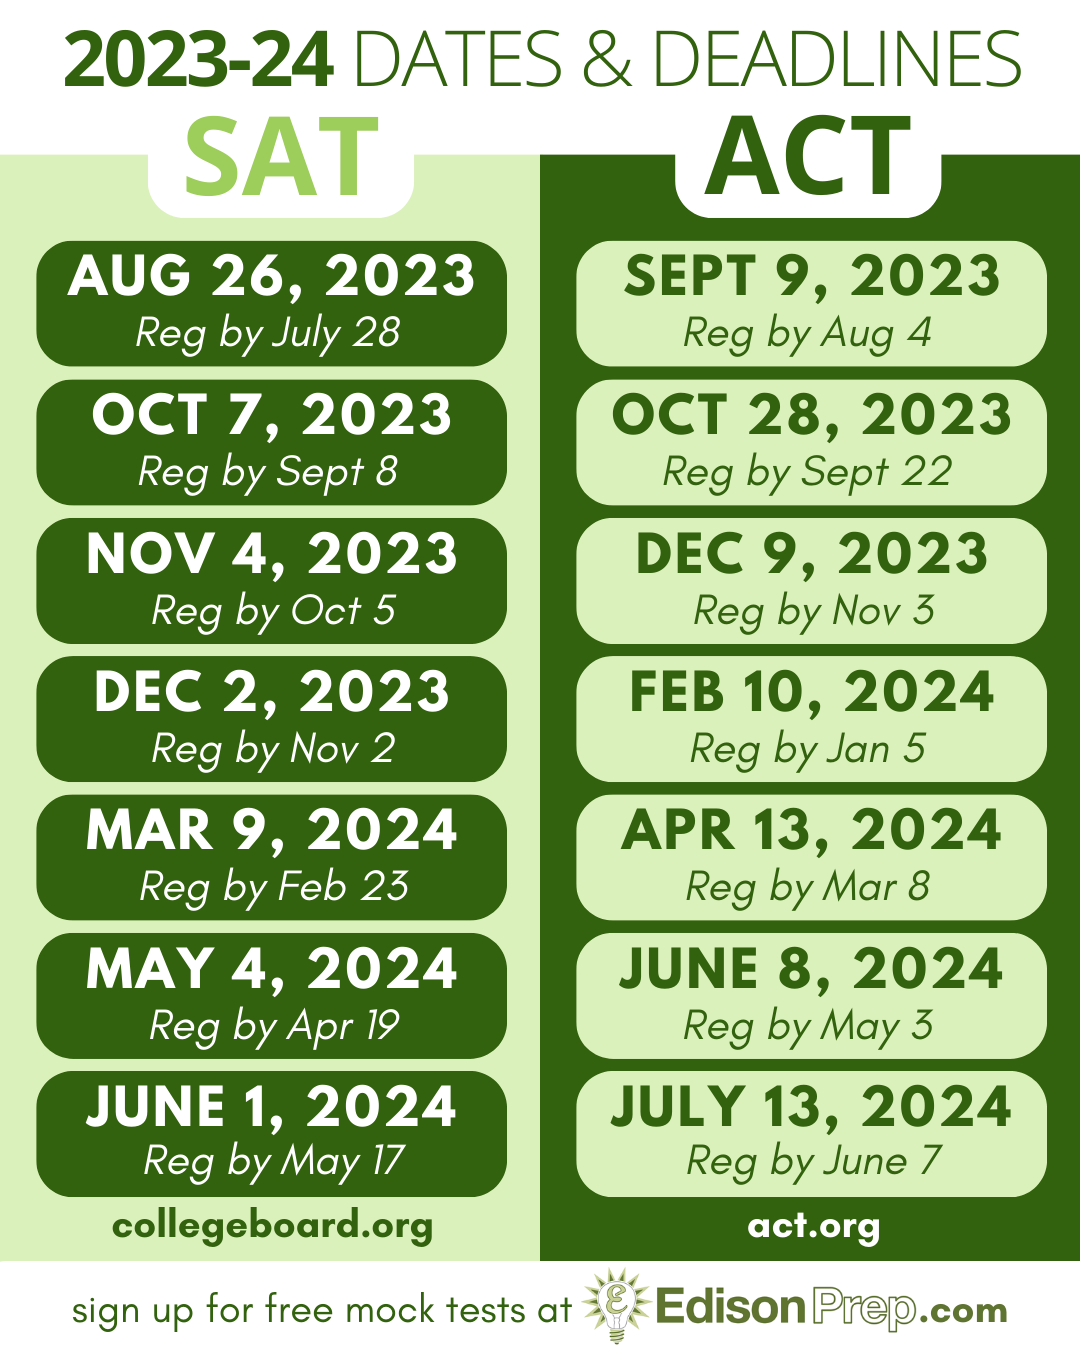 SAT and ACT have released their test dates for the 2023-2024 school